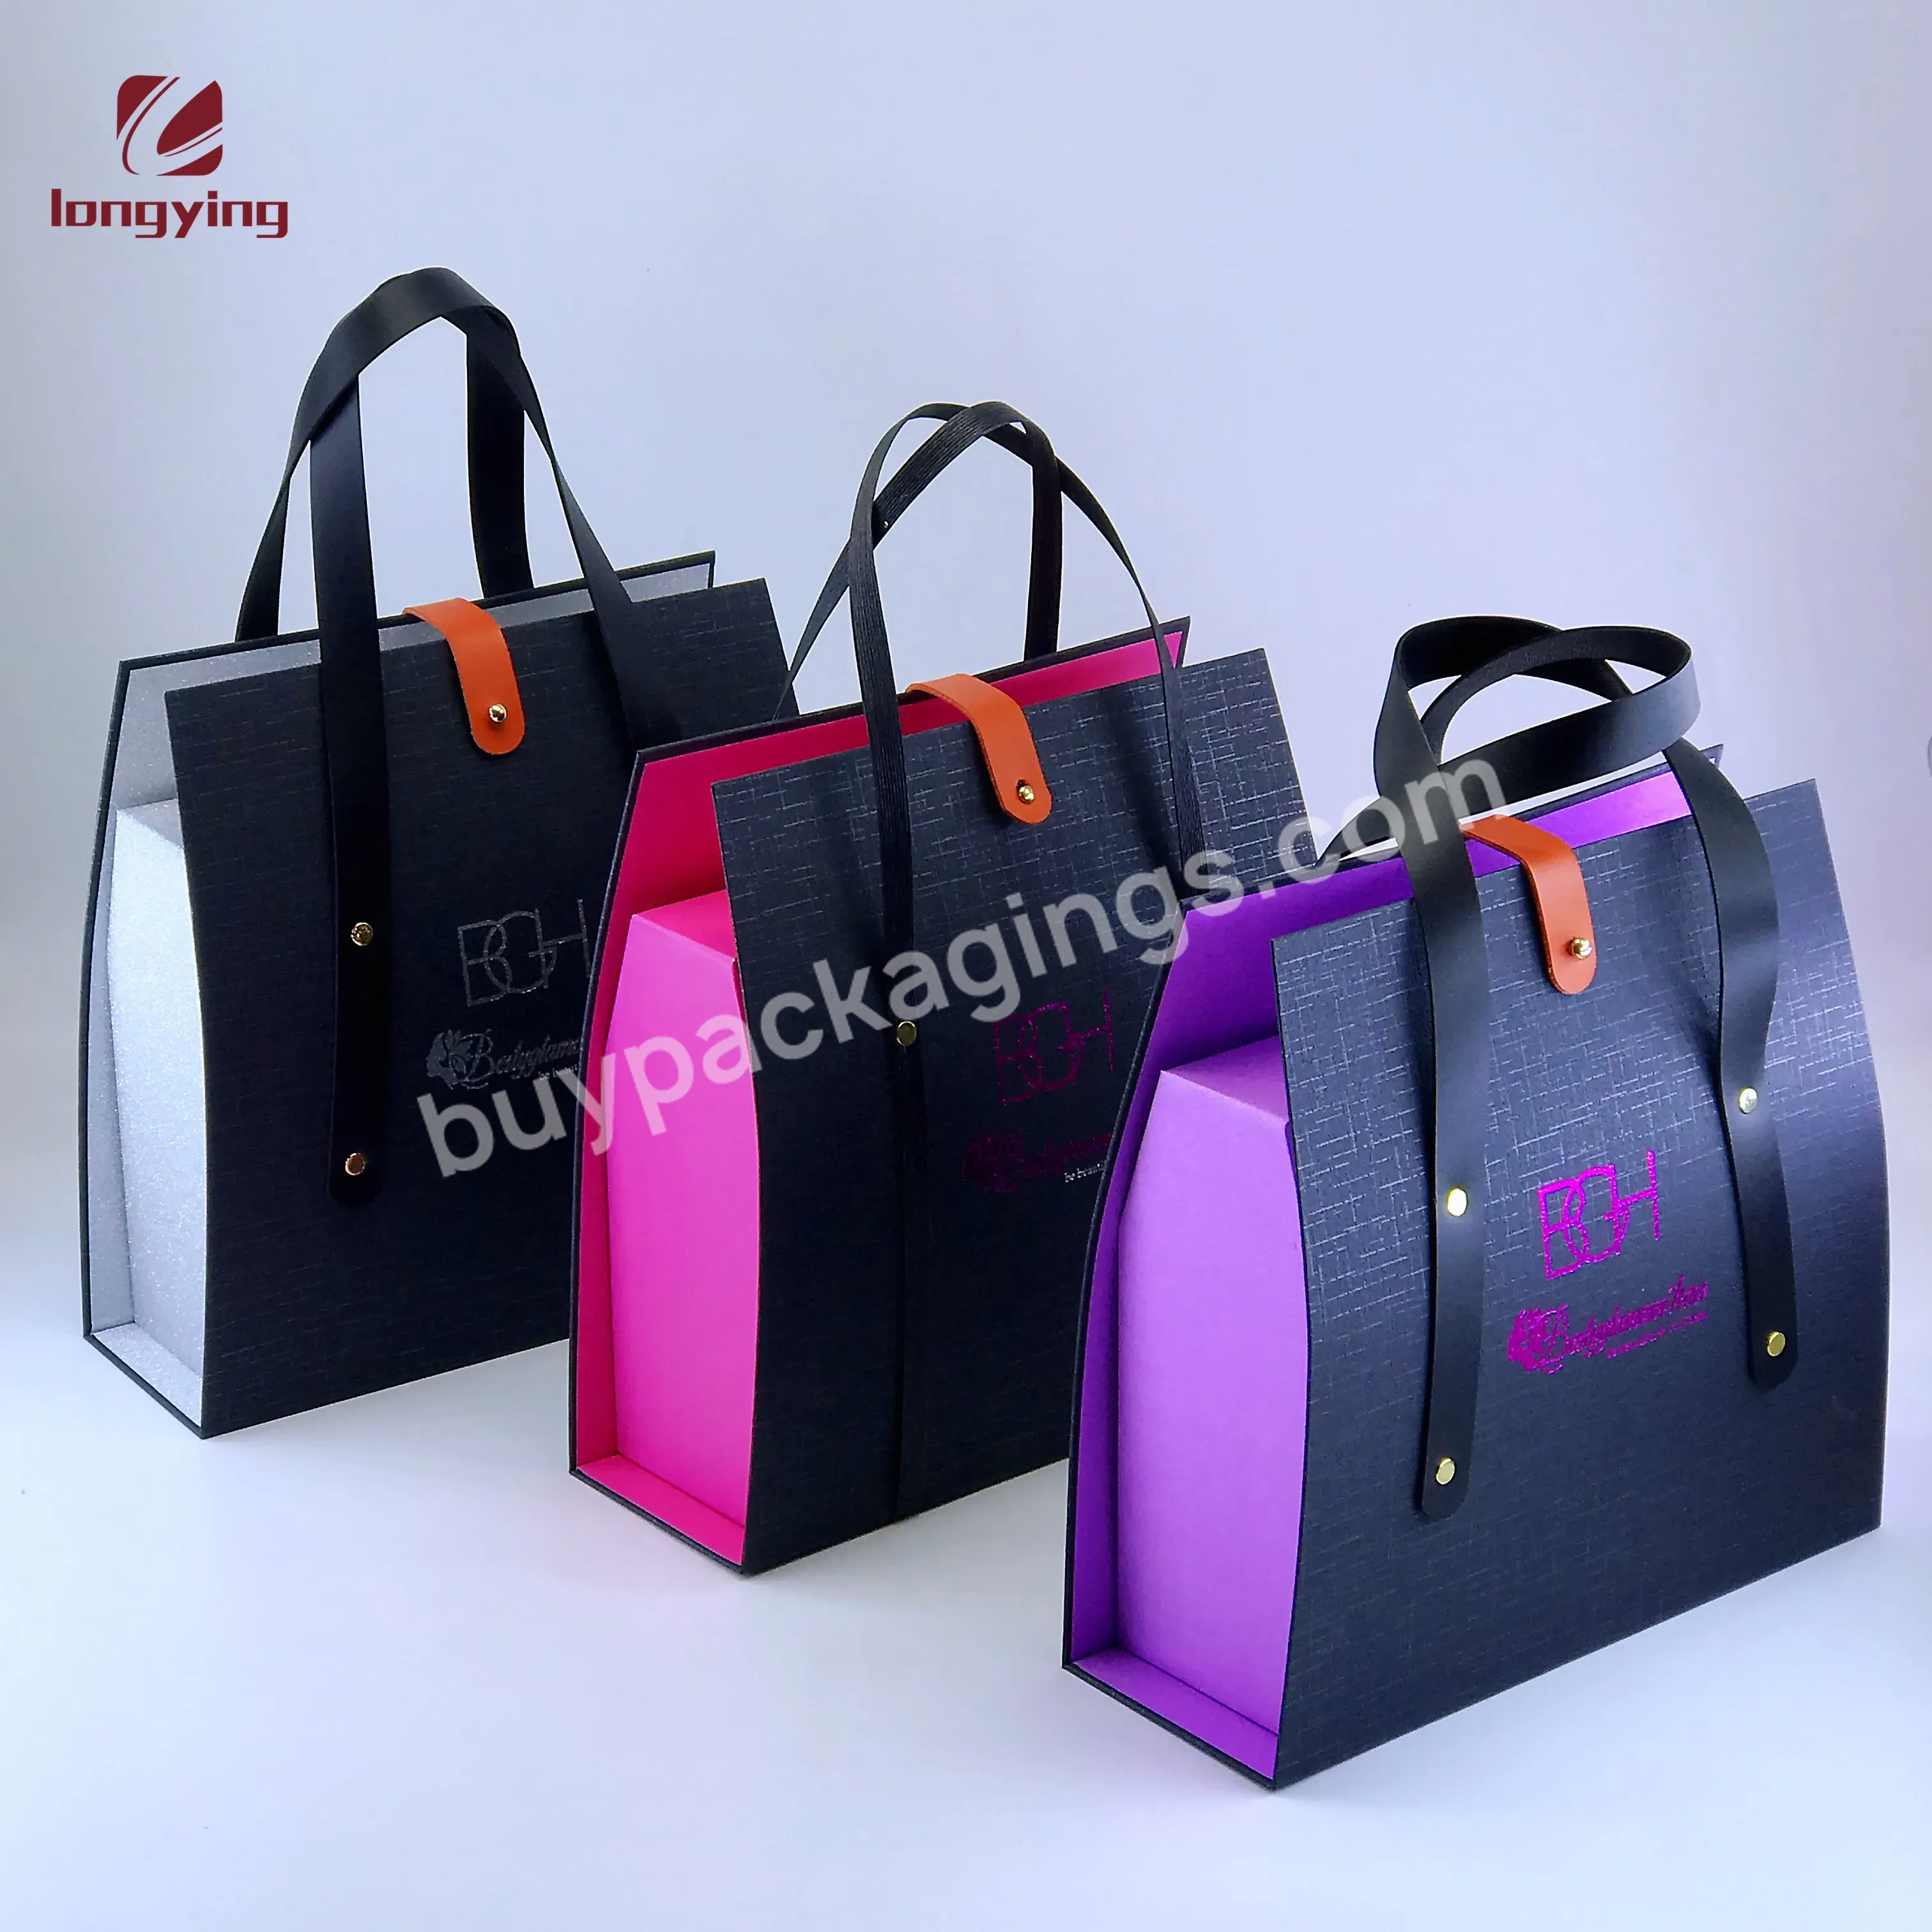 Black Luxury Gift Boxes Wholesale With Handle Buckles Belt For Gift Box Business/apparel/cosmetic/hair Extension Box - Buy Black Luxury Cardboard Box Gift Boxes Wholesale,Handle Buckles Belt,Business/apparel/cosmetic/hair Exte Packaging.